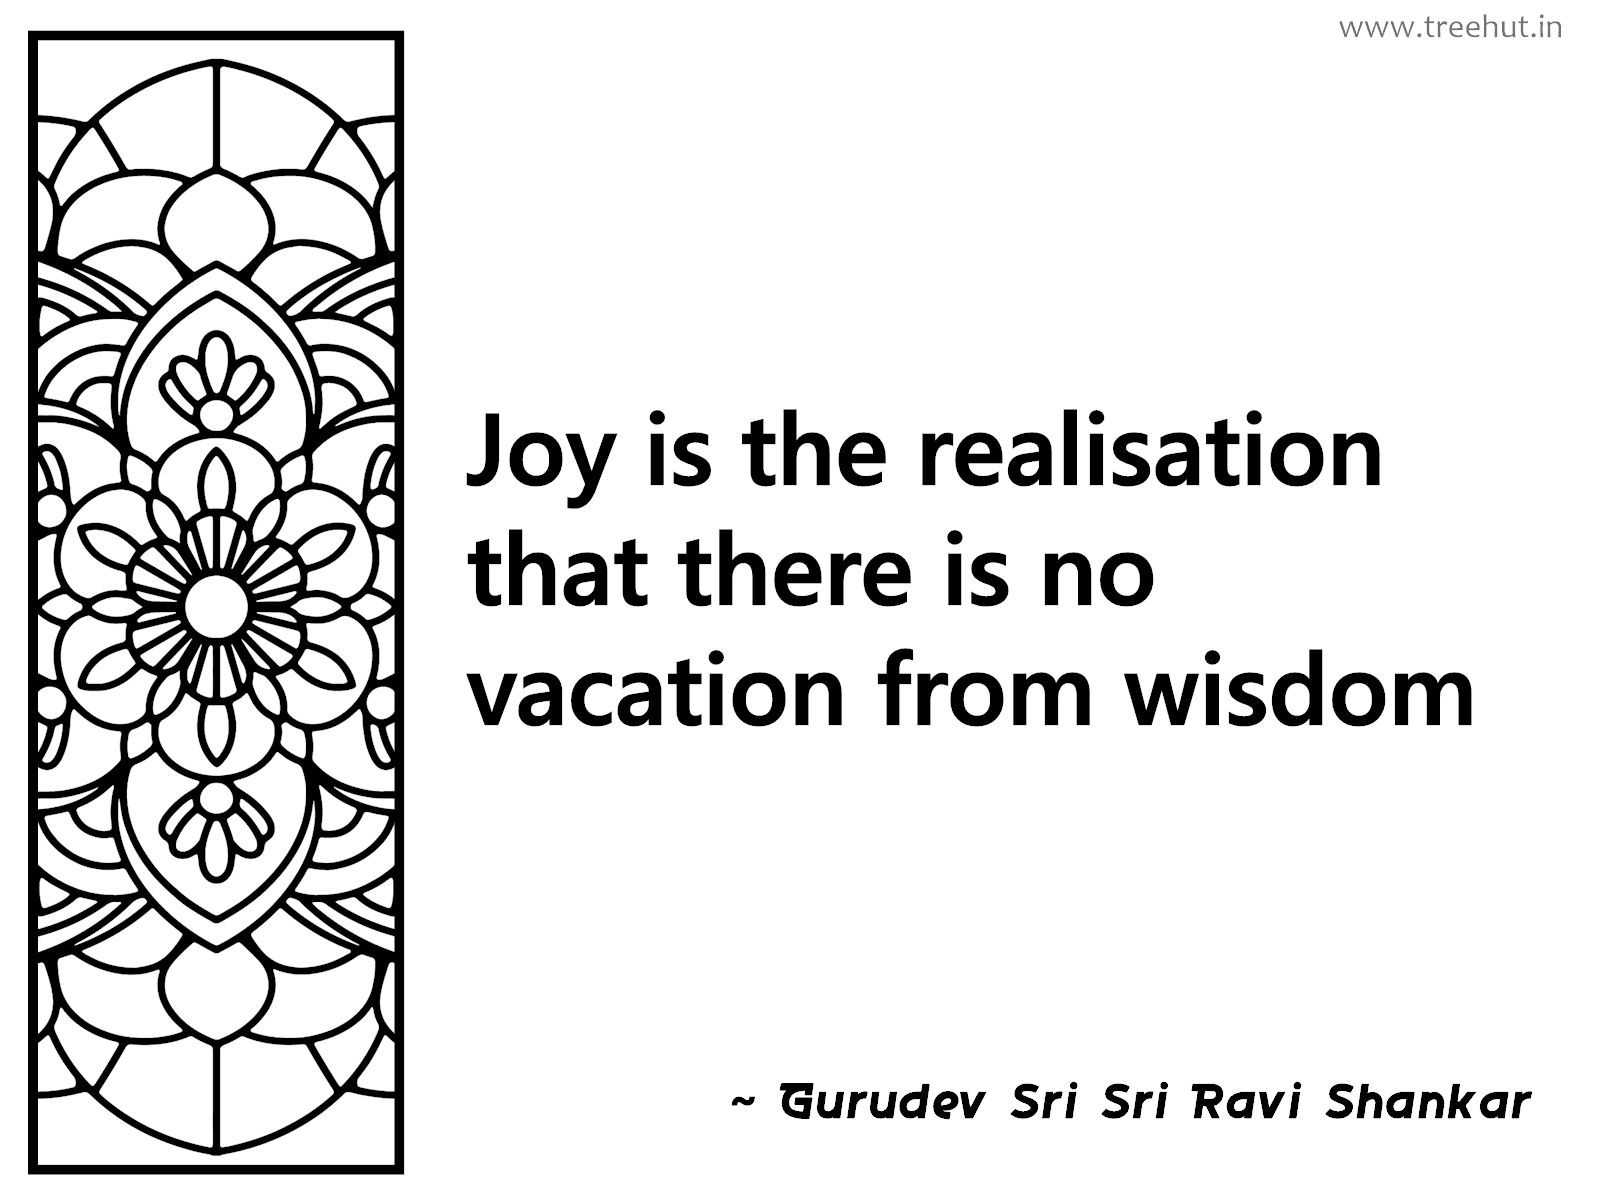 Joy is the realisation that there is no vacation from wisdom Inspirational Quote by Gurudev Sri Sri Ravi Shankar, coloring pages